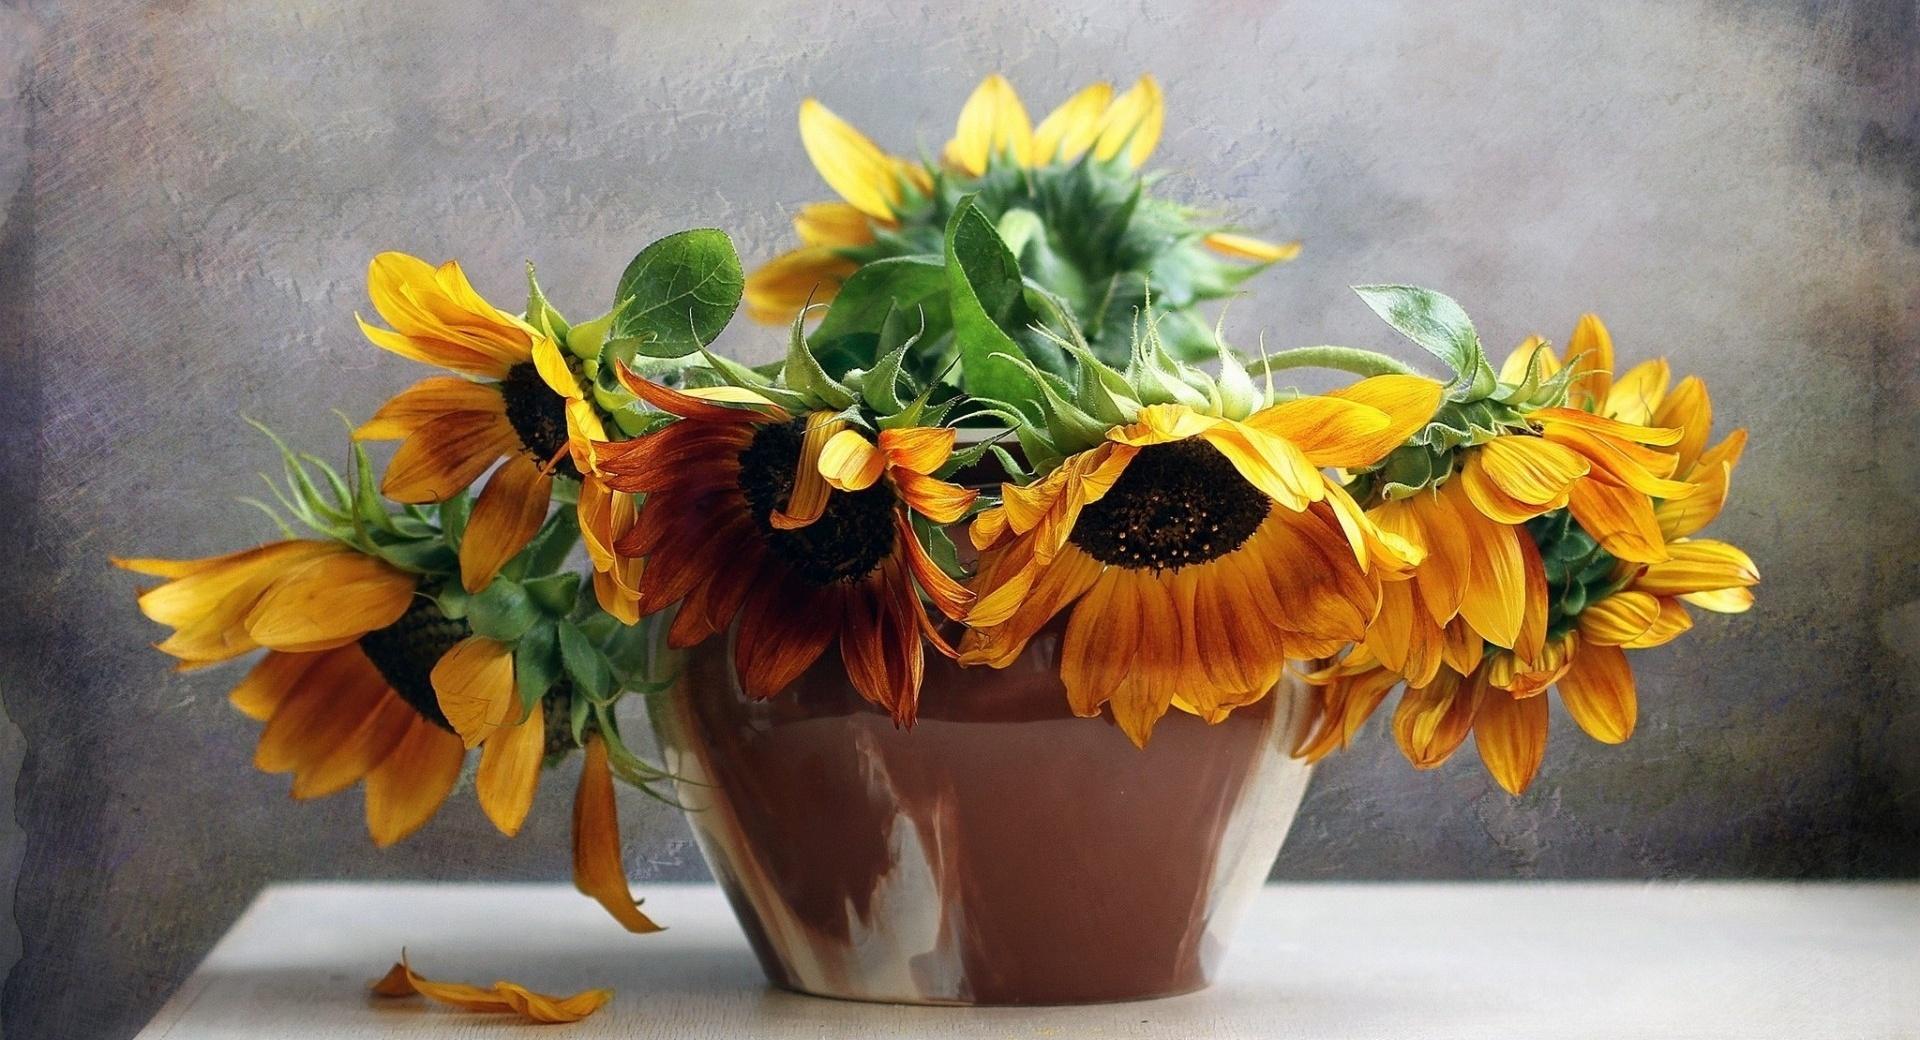 Sunflowers On The Table wallpapers HD quality